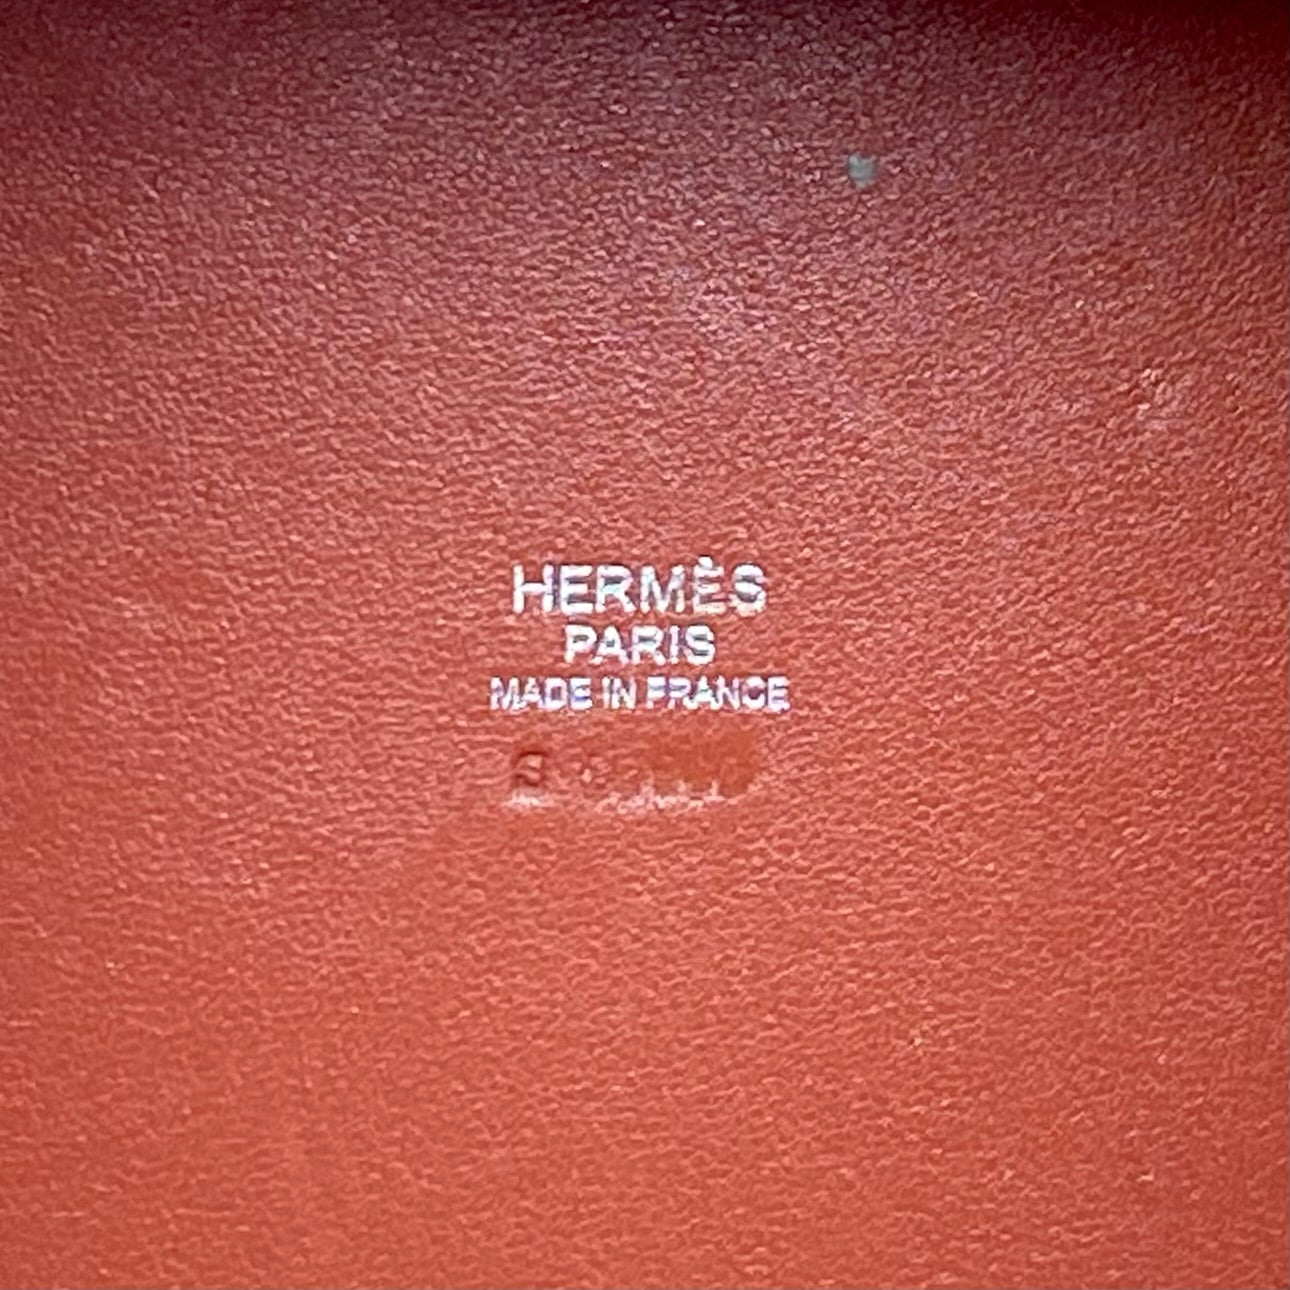 Hermes Terre Cuite Ostrich Picotin 18